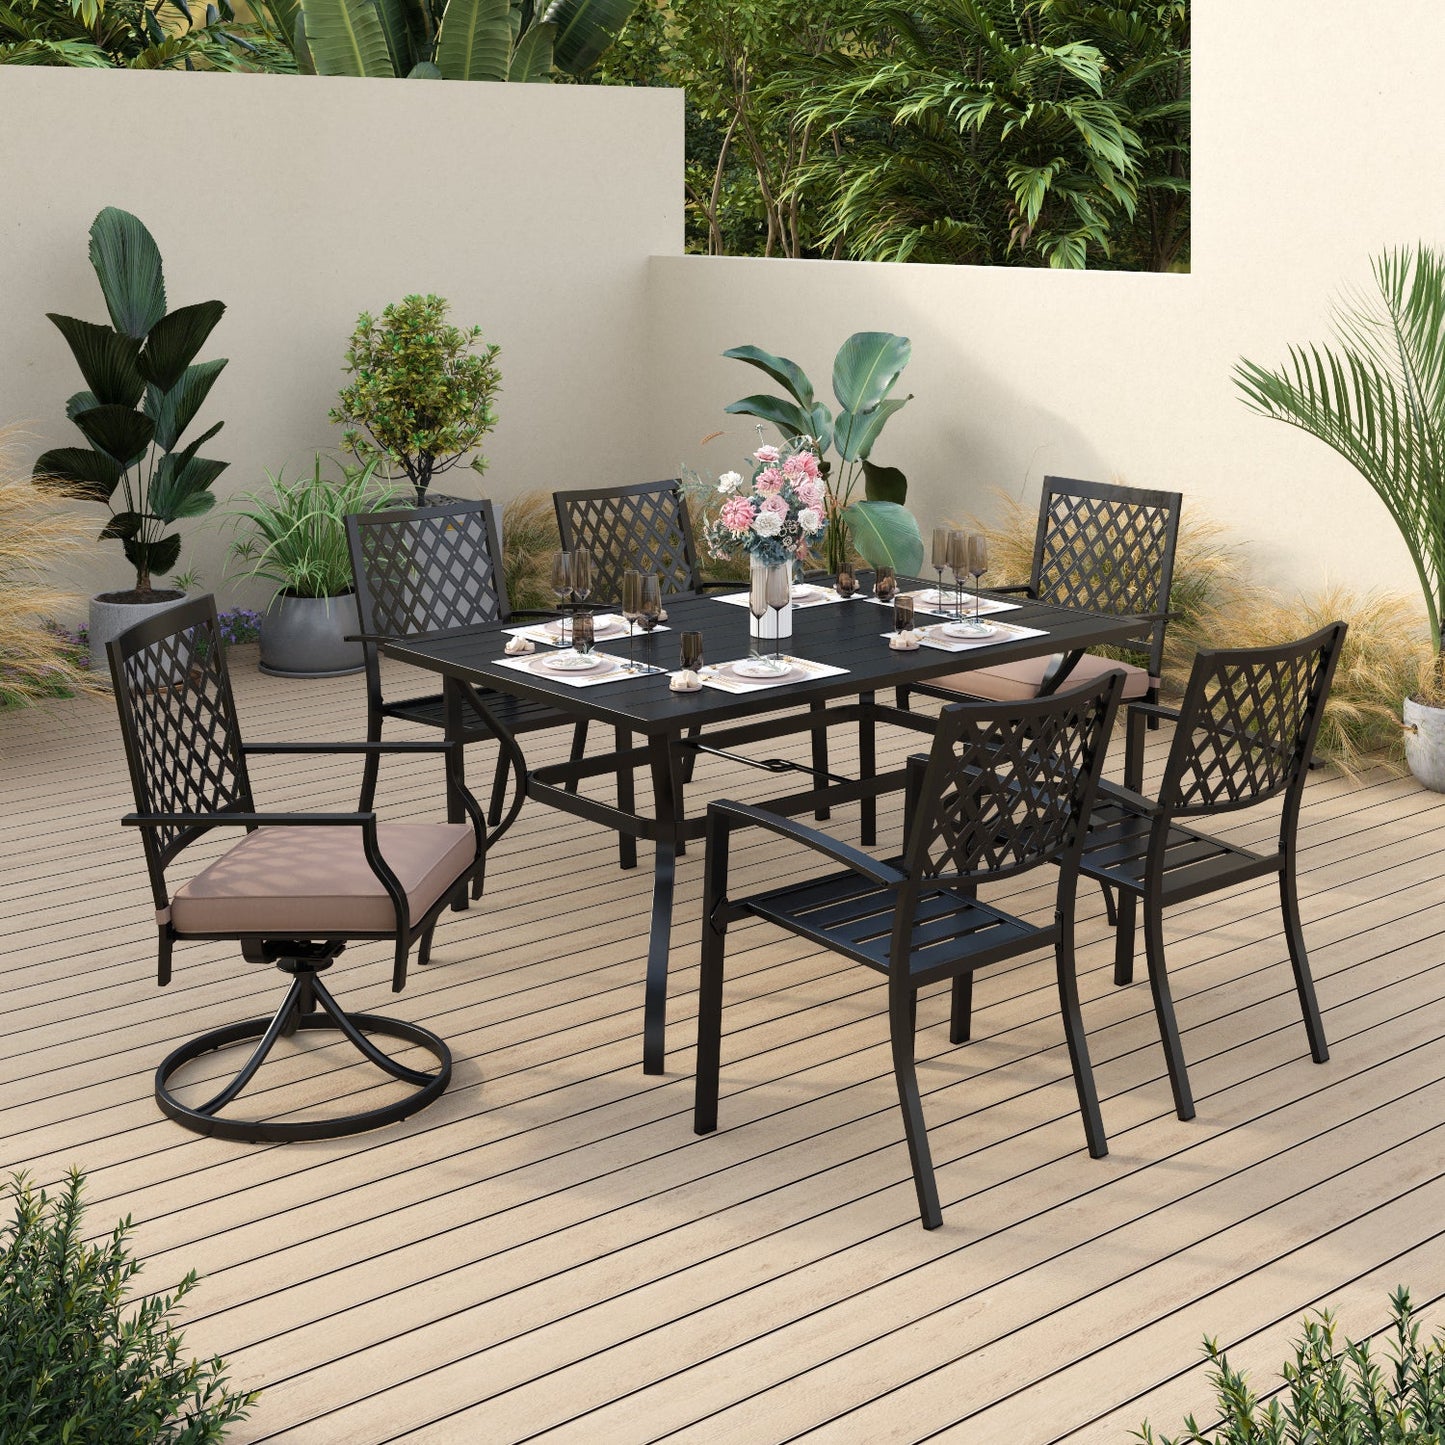 Sophia & William 7 Pieces Outdoor Patio Dining Set Patio Dining Chairs and Metal Dining Table